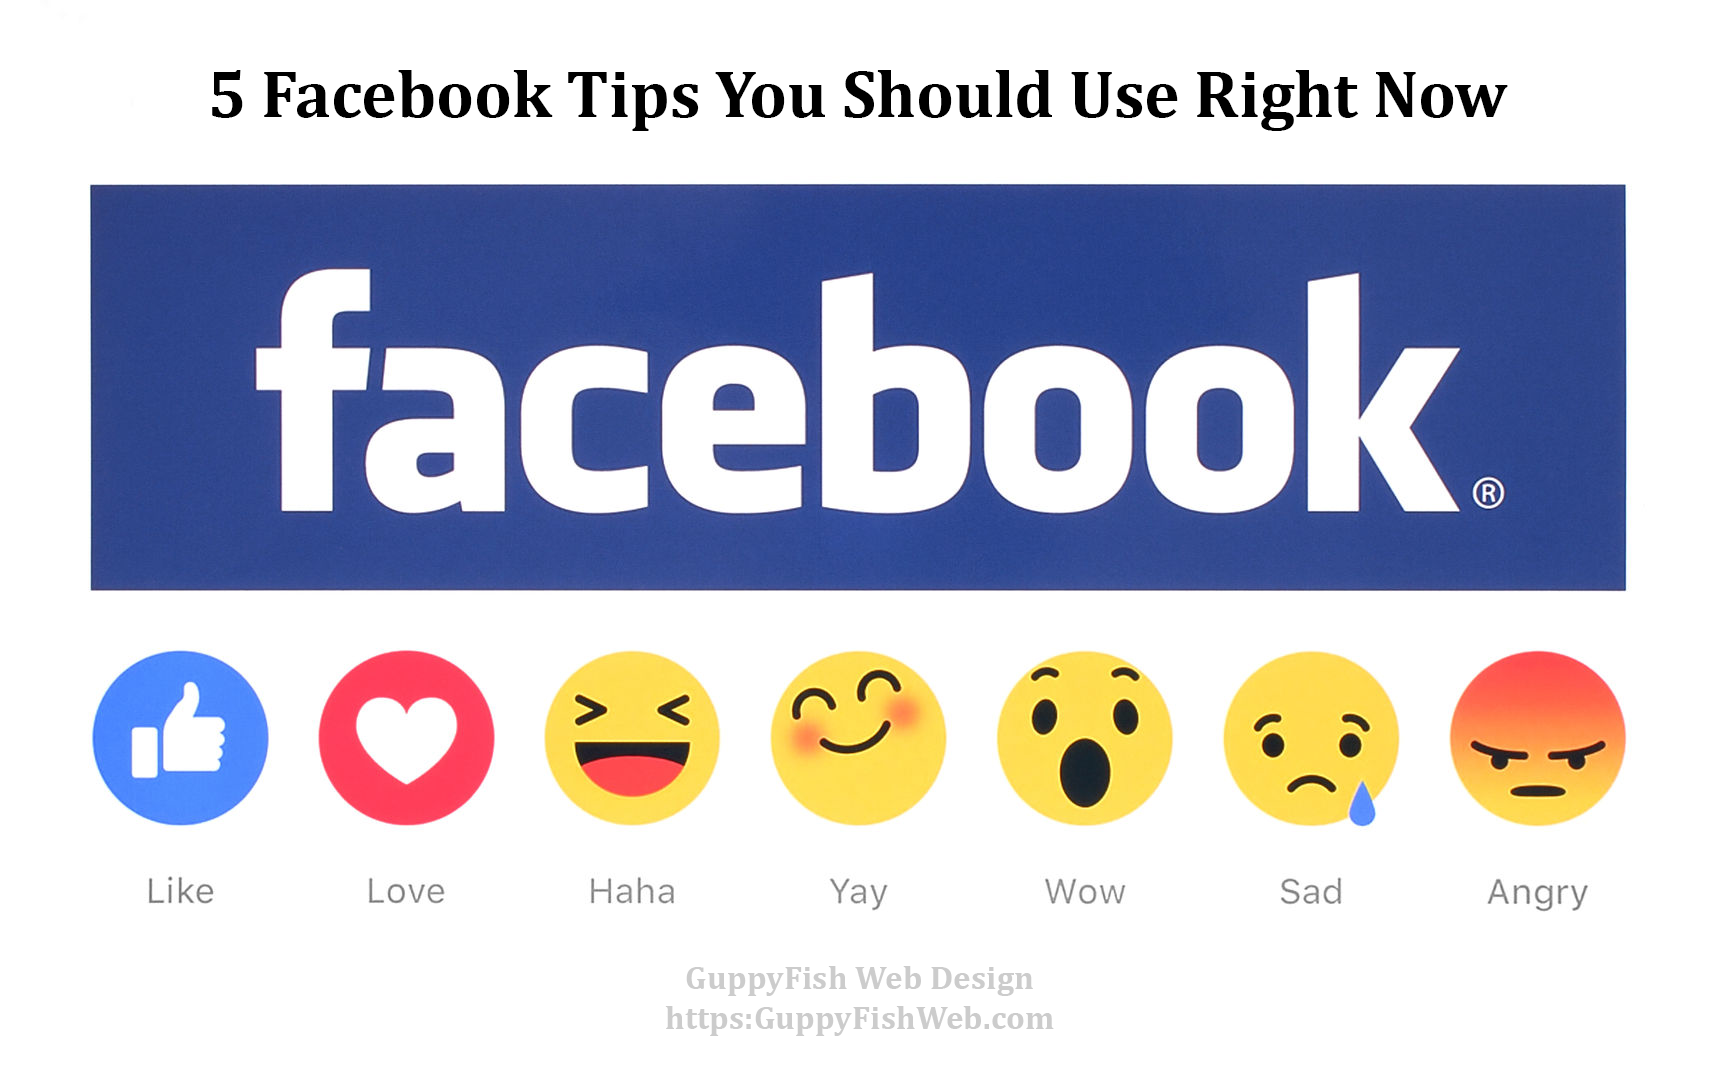 5 Facebook Tips You Should Use Right Now